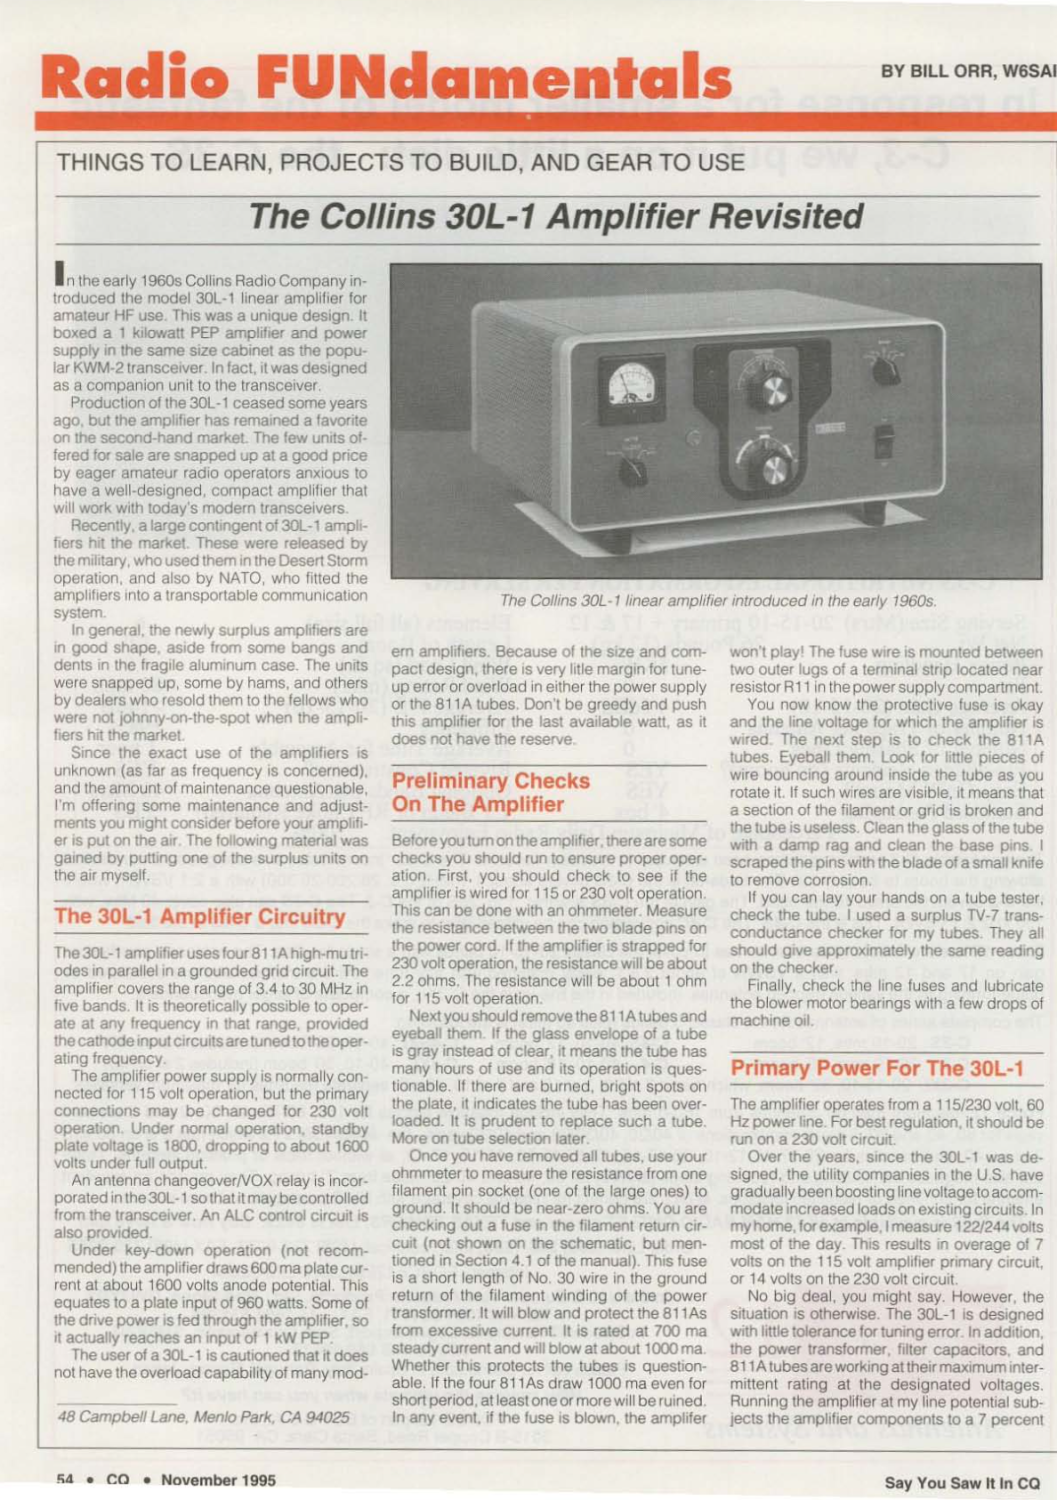 Collins 30L-1 - RF Linear Amplifier - Amplifier Revisited by Bill Orr W6SAI for CQ Magazine (1995-11)